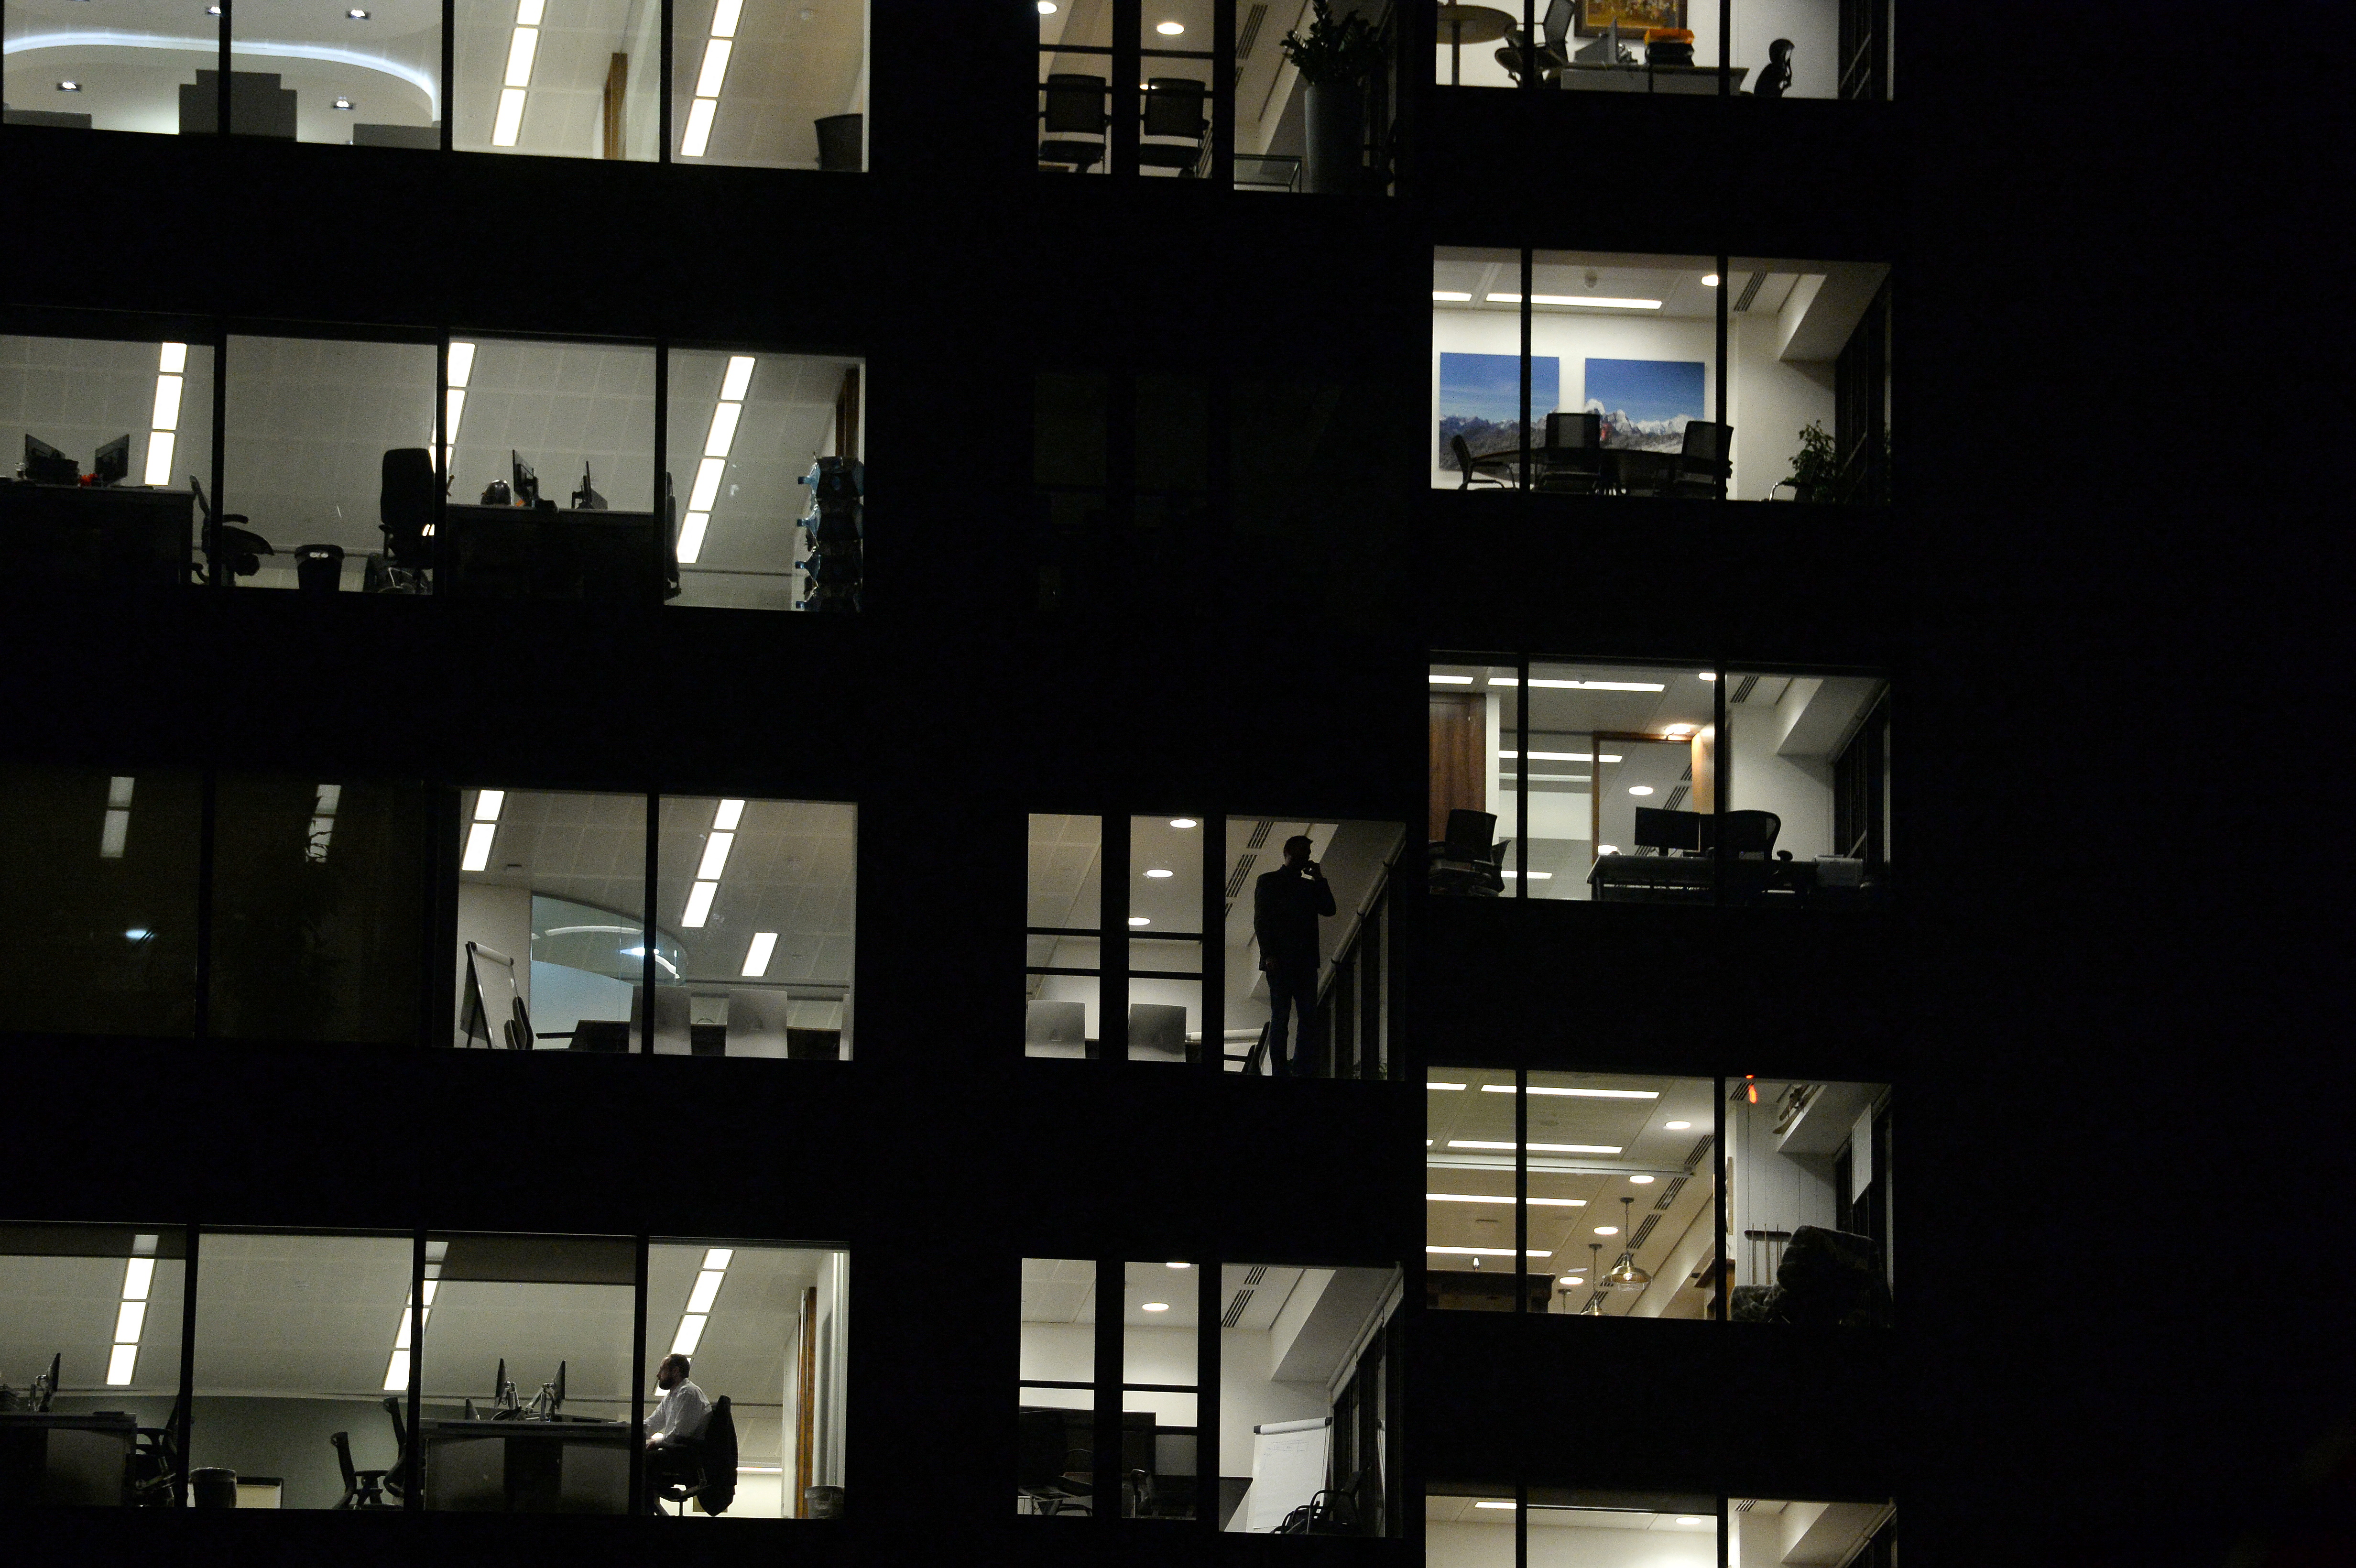 Workers continue working into the night in the City of London